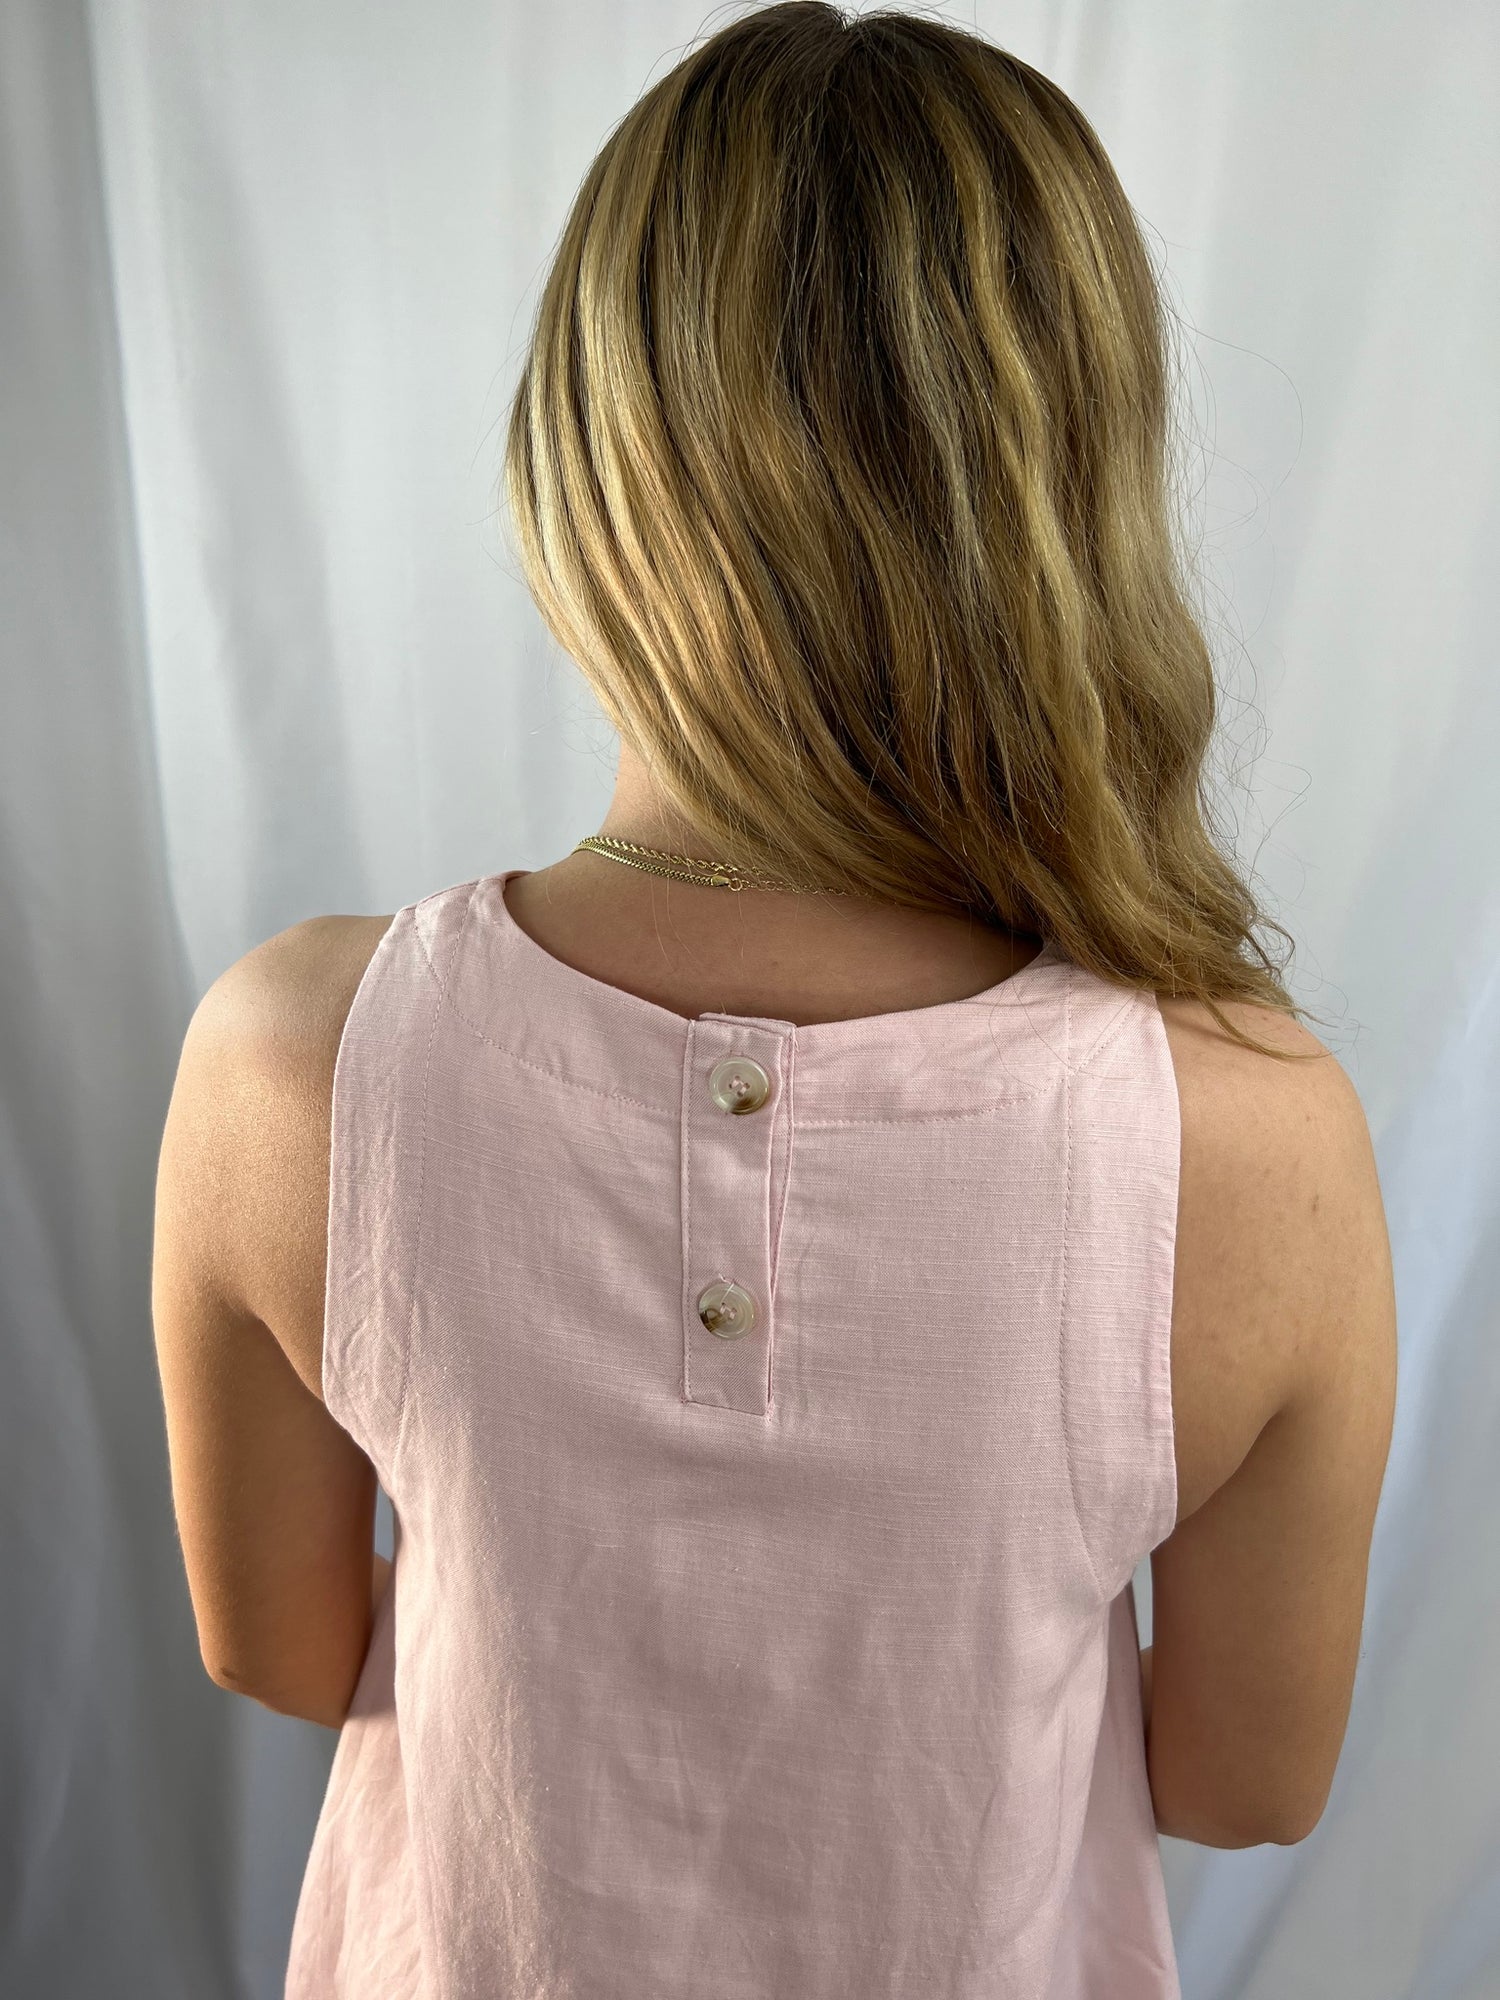 pale pink linen-blend trapeze A-line mini dress fully lined with back neckline button closure 55% Linen 45% Rayon Lining 100% Rayon